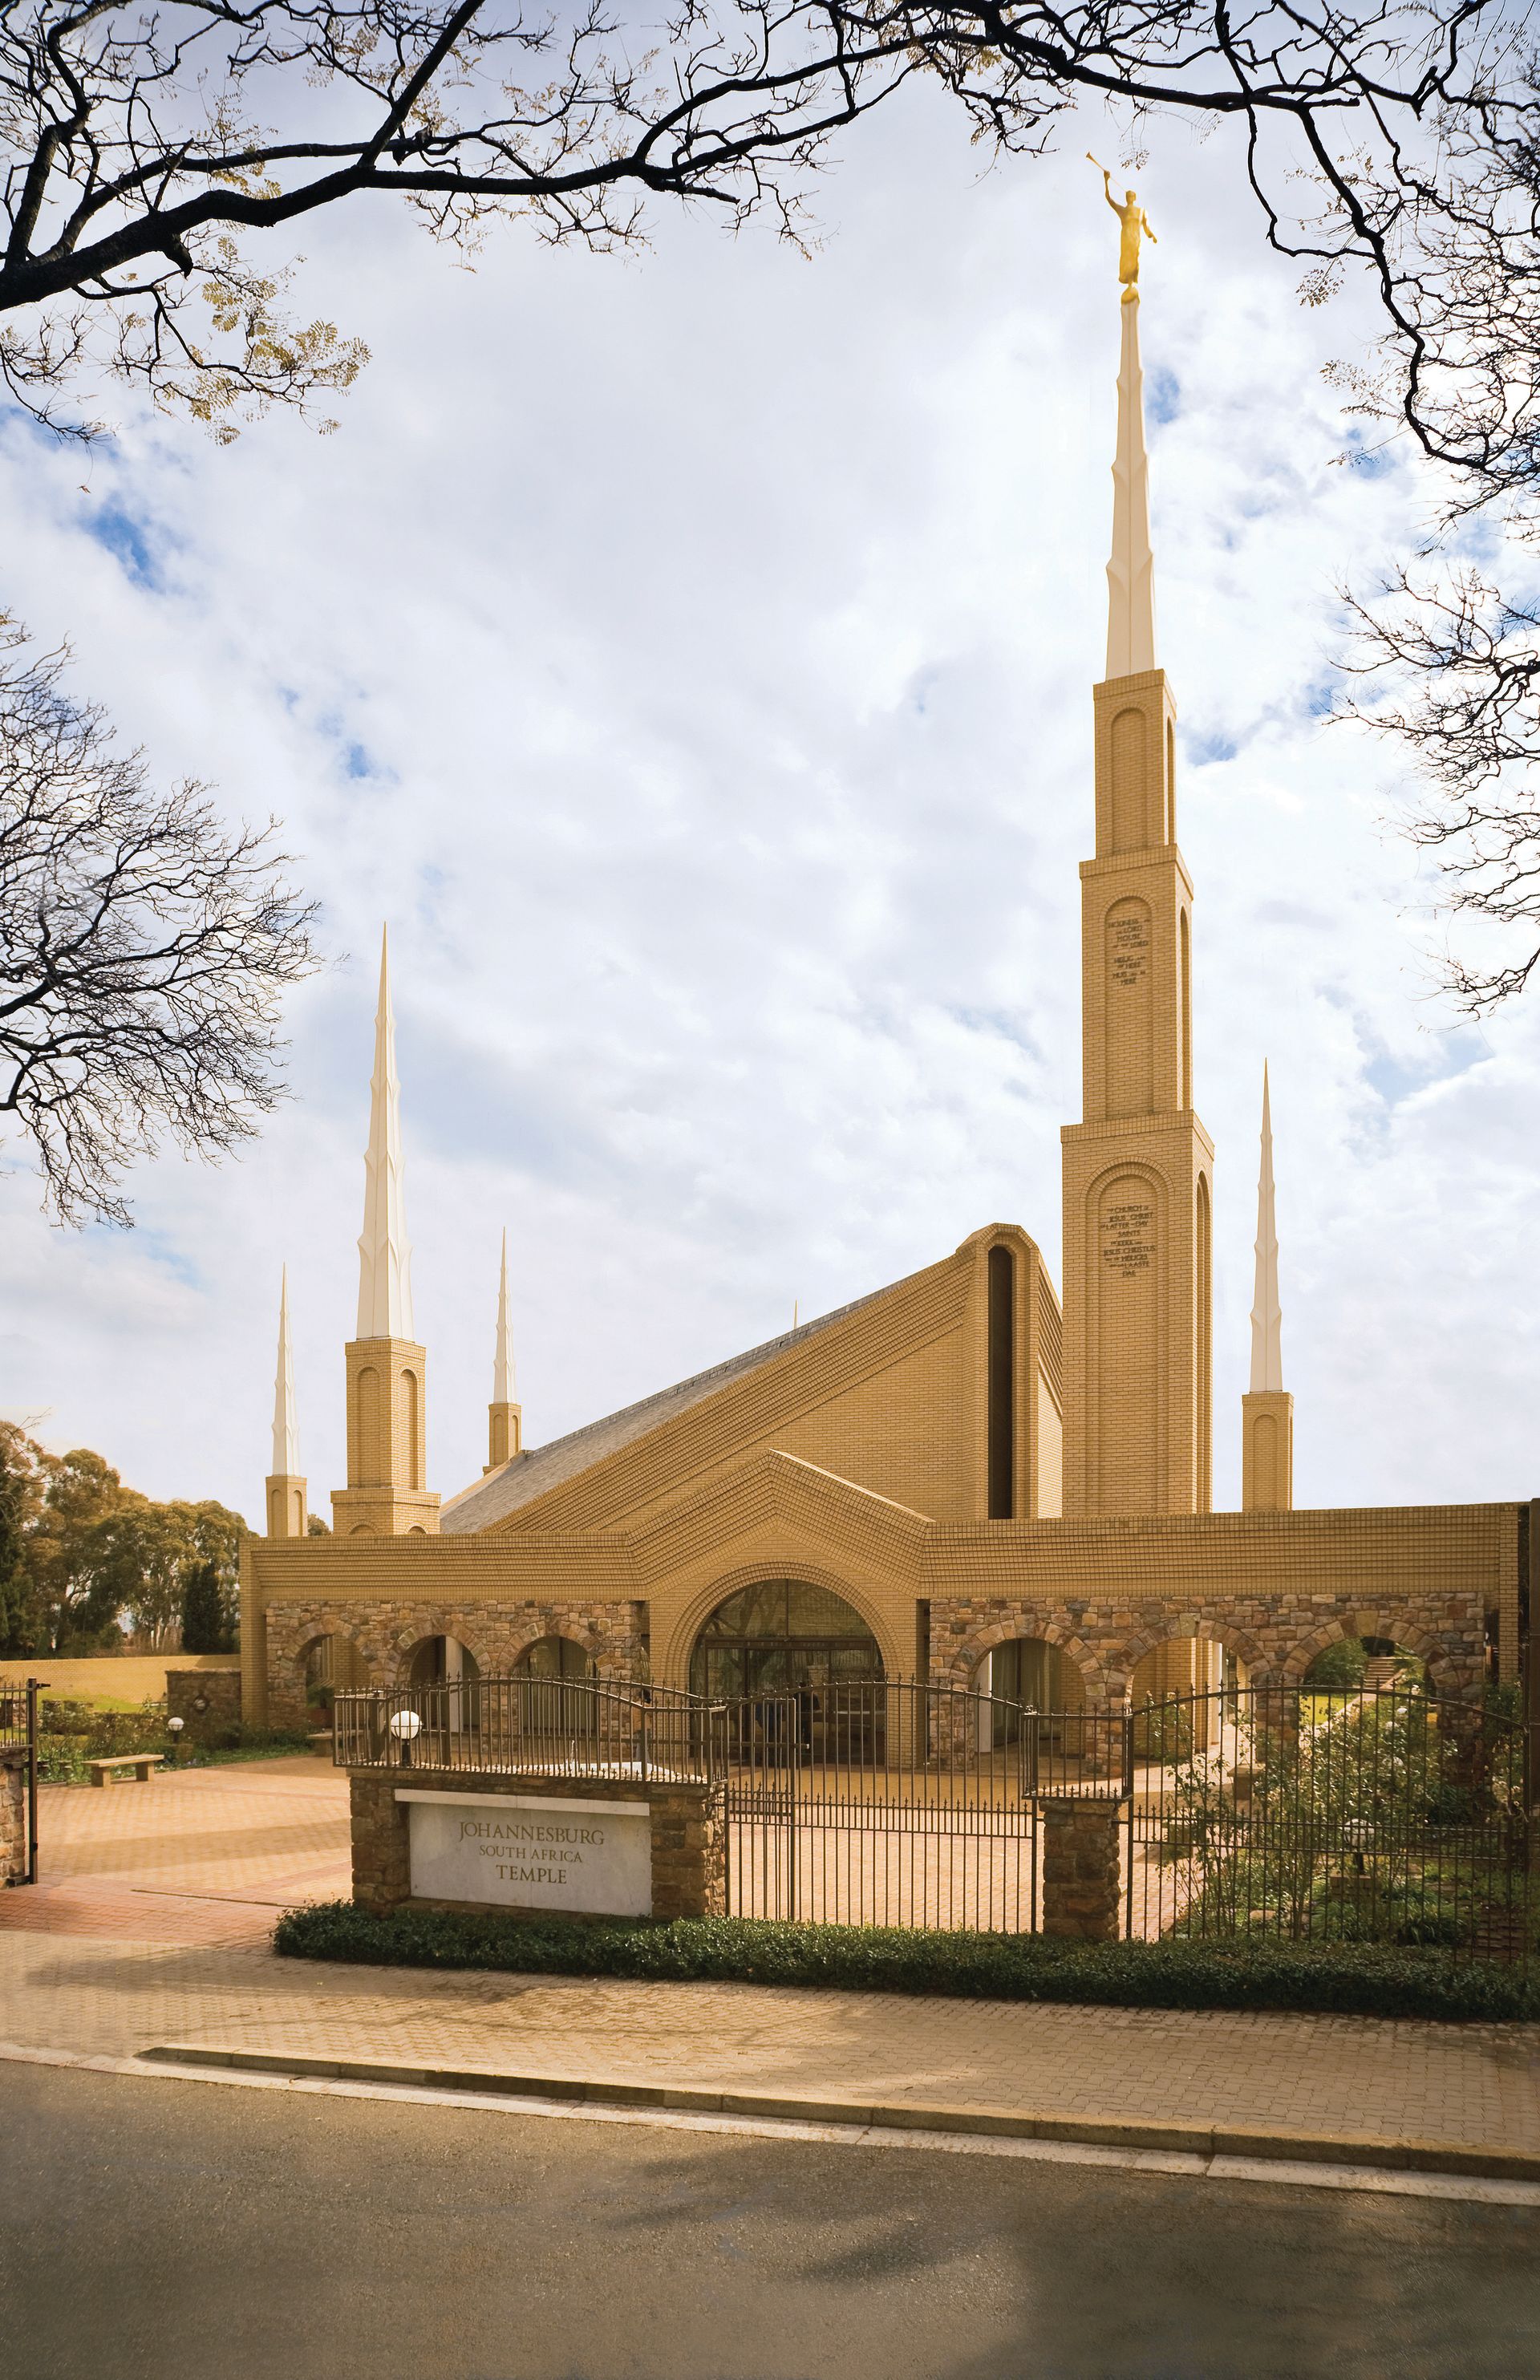 A view of the Johannesburg South Africa Temple, including the name sign, entrance, and landscaping.